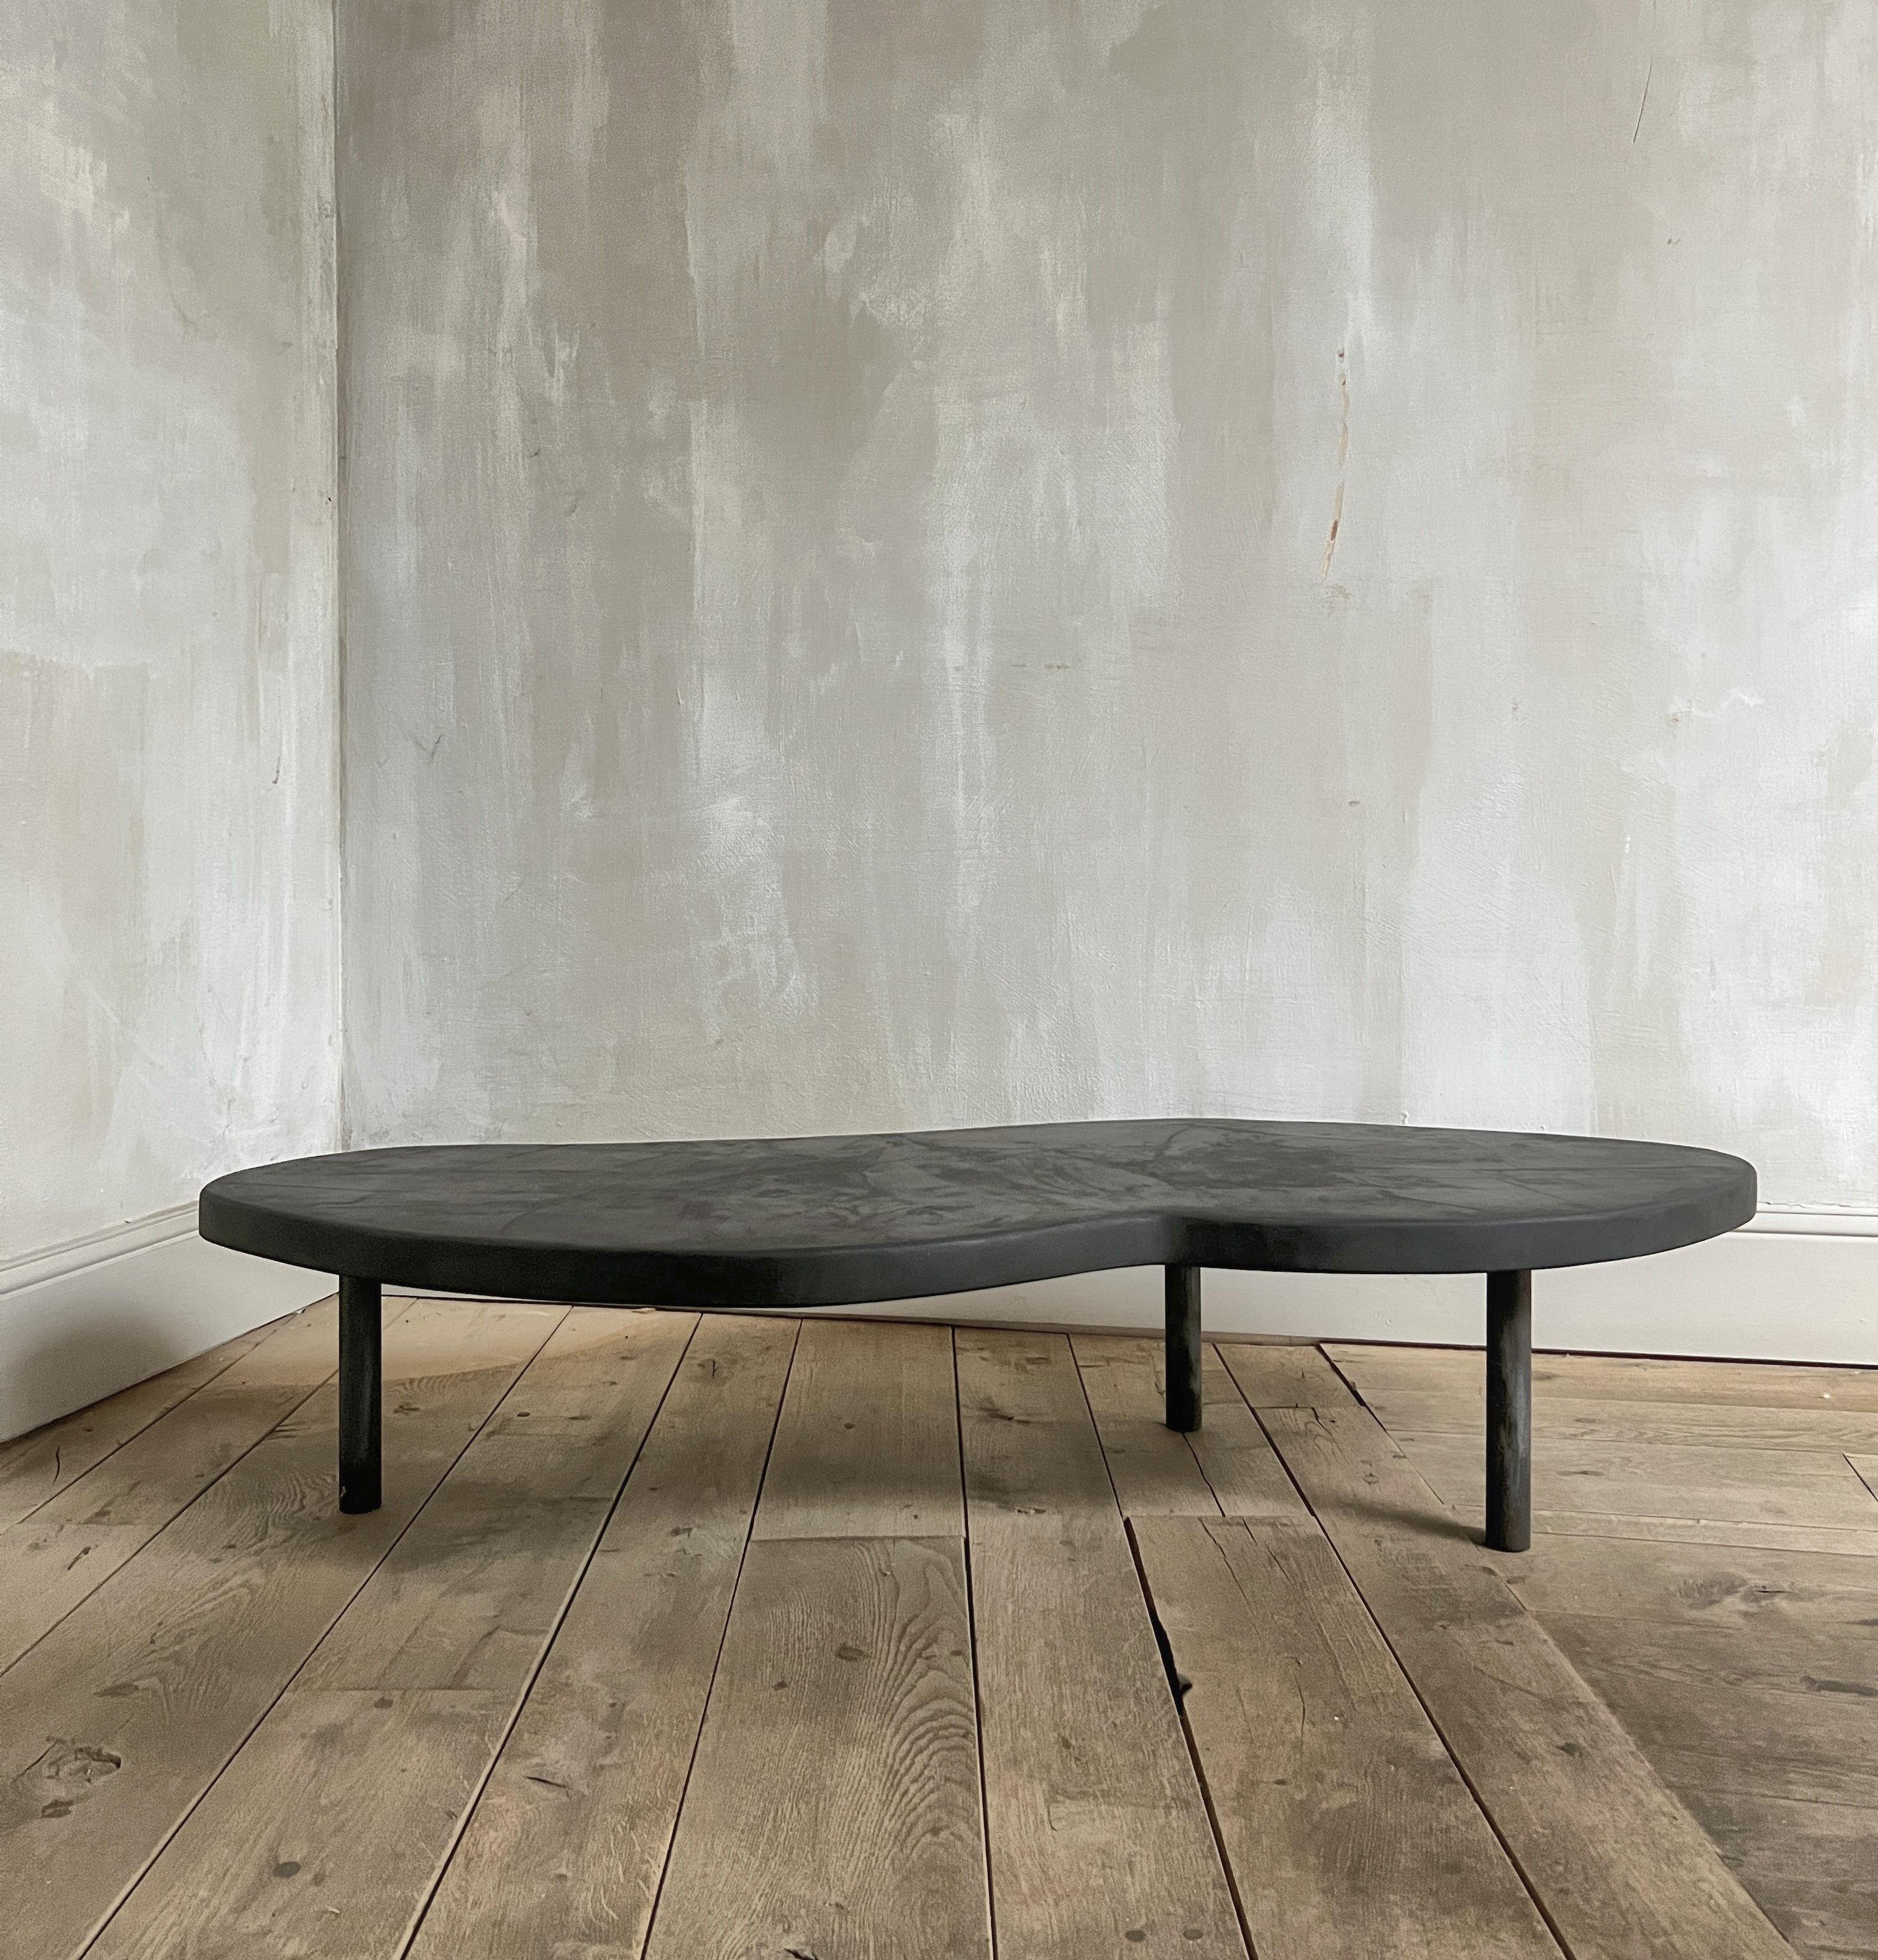 We can make this table in any size and dimensions. Also the color of the marbleplaster is at will. This particular one can be purchased together with the smaller wooden table or seperatly. You can find both options listed in our storefront